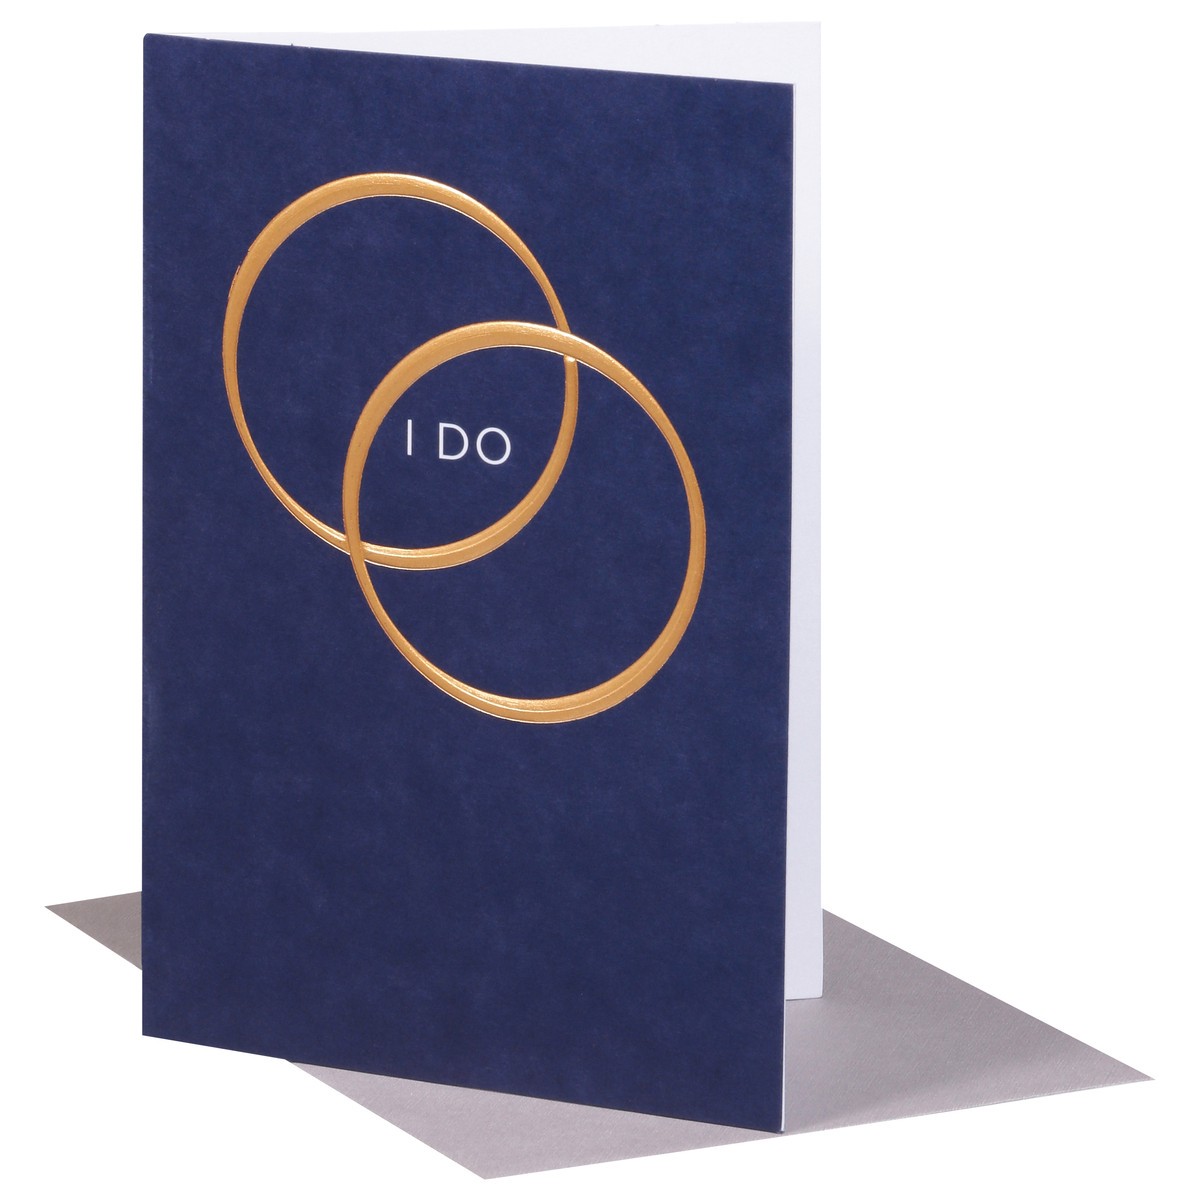 slide 9 of 9, American Greetings Ring in their new lives together with this elegant wedding card. The design features two metallic gold wedding bands on a navy blue background and the words “I DO” on the front. The inside contains simple words of congratulations for the happy couple. It's suitable for sending to any twosome on their happy day. Envelope included., 1 ct